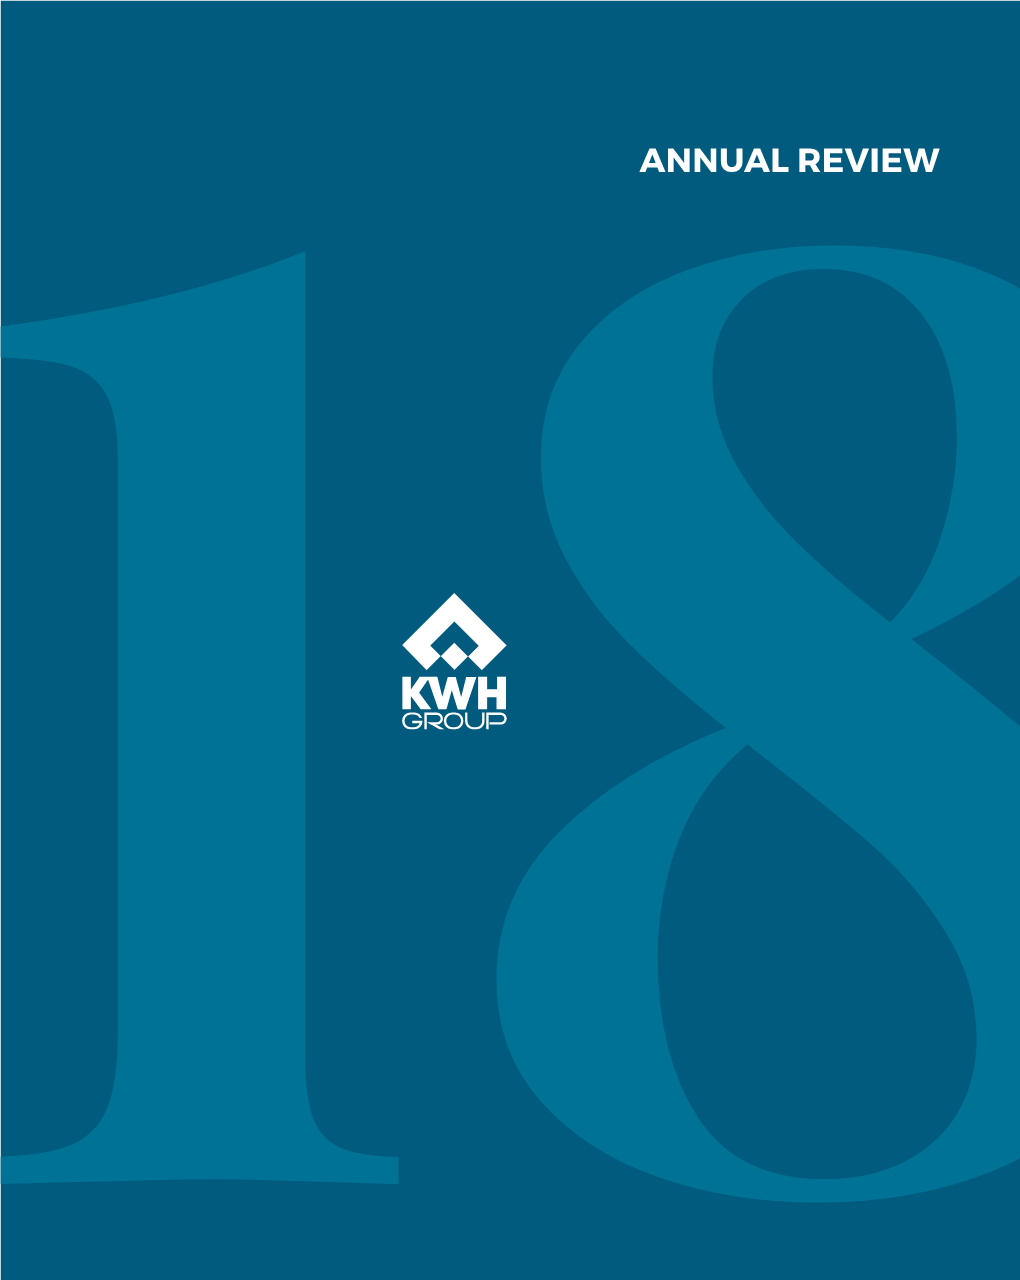 ANNUAL REVIEW 90 Years of Successful Business Building